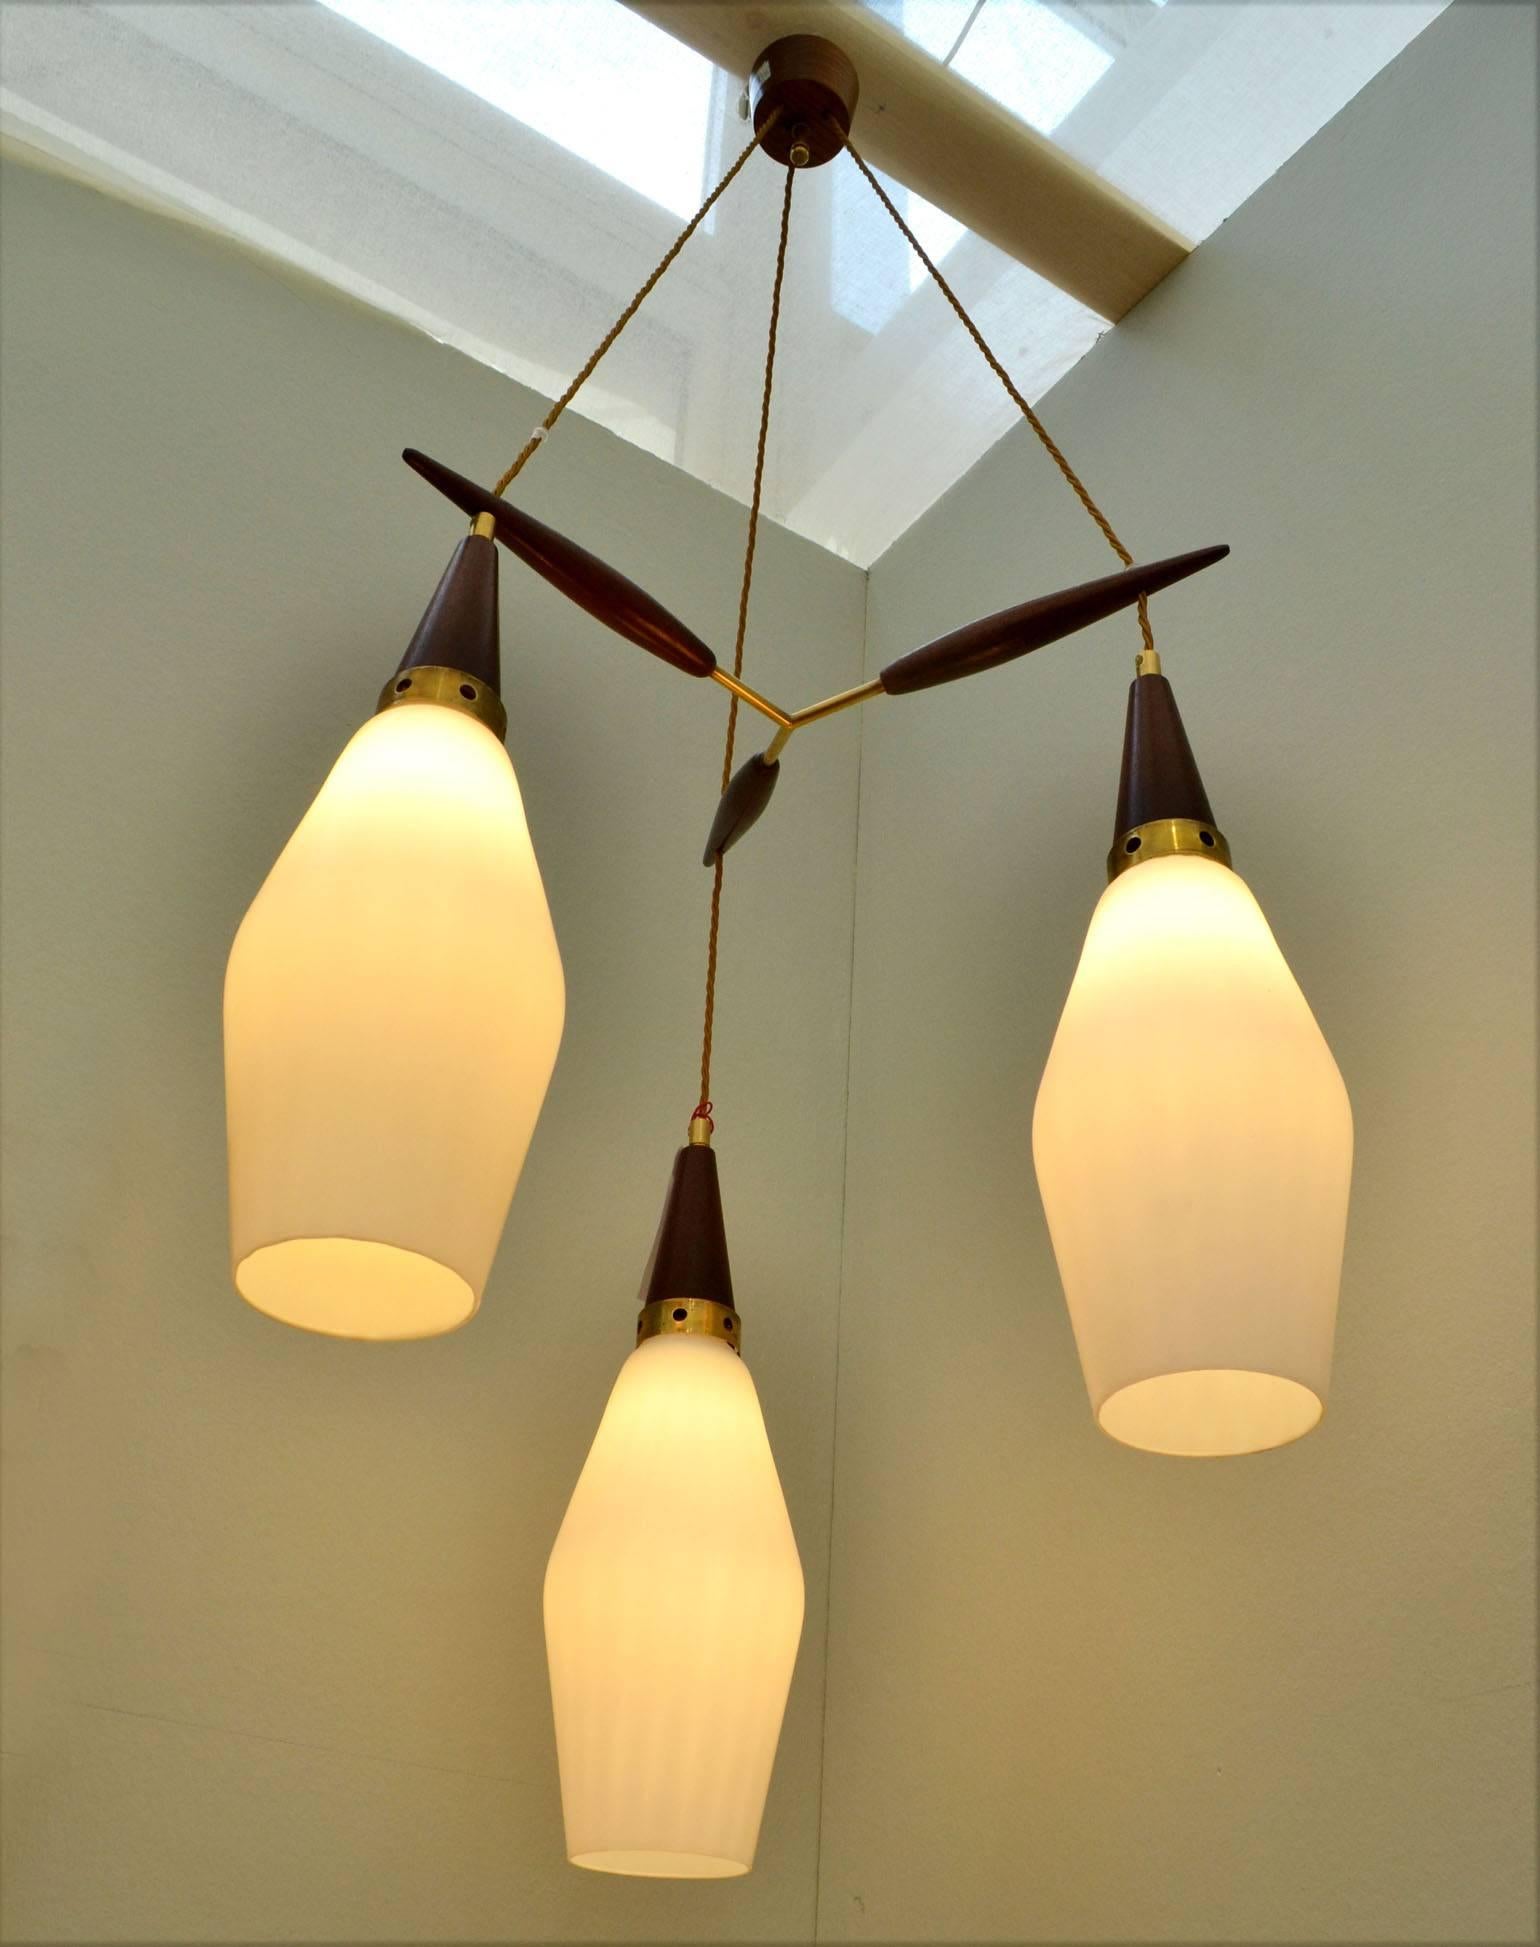 The three pendants are in dark teak wood, brass and opaline glass shades spaced by a teak and brass suspension and connected to a teak ceiling rose.
Dimensions of each pendant:
Height 40 cm,
diameter 19 cm.
Each shade assembly can be adjusted in